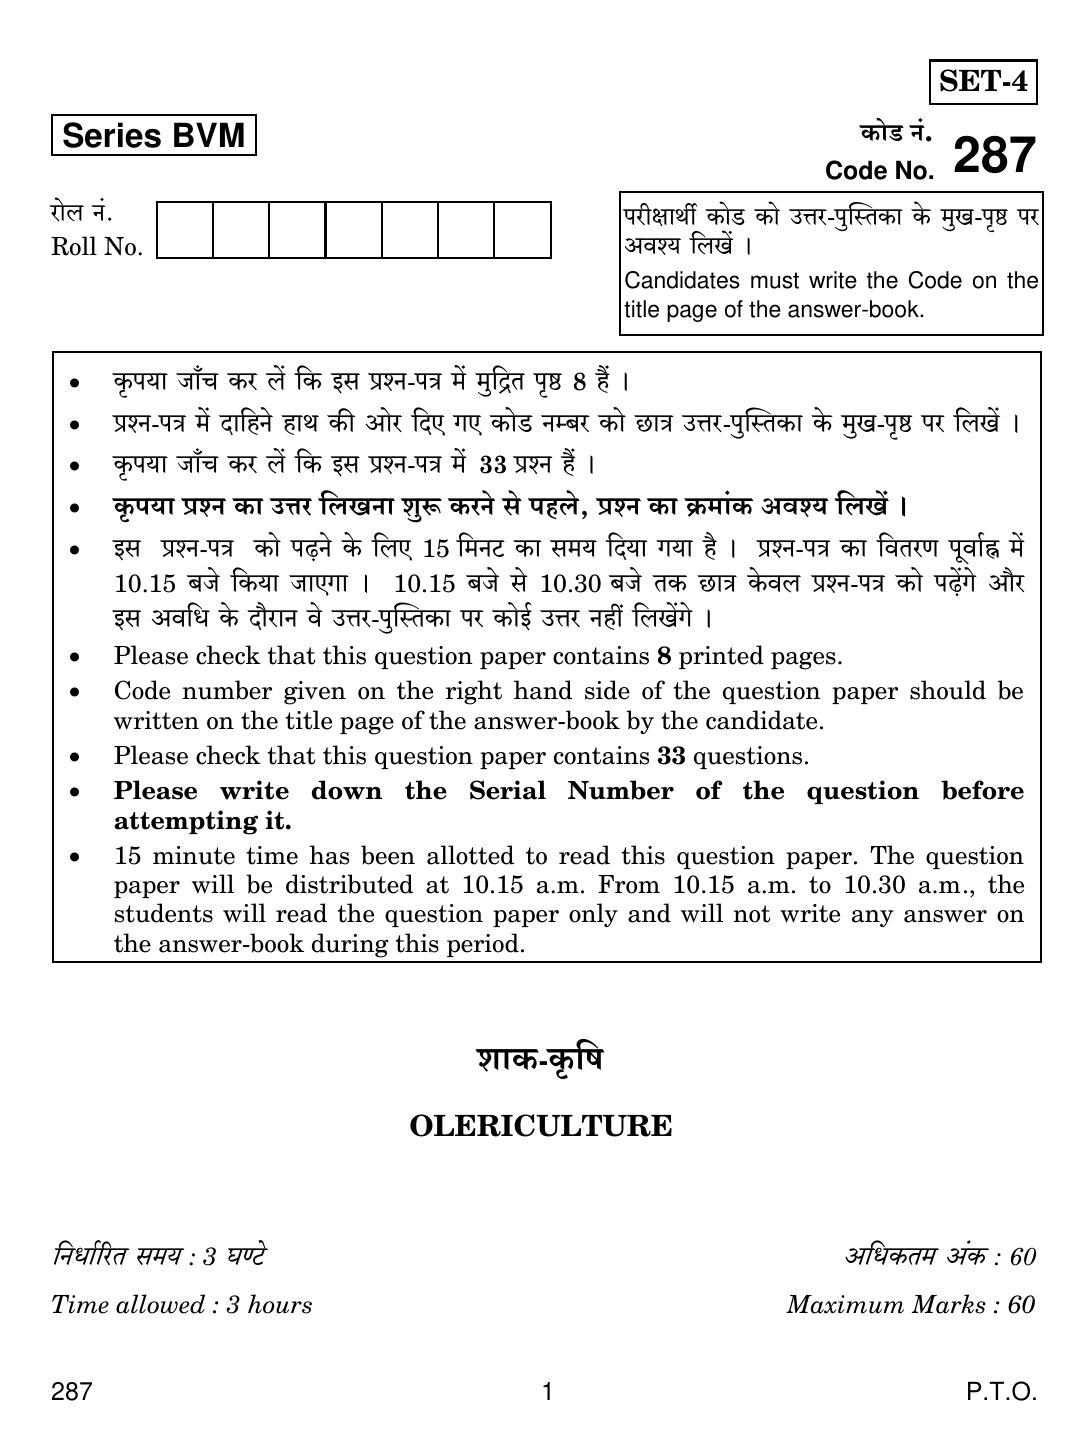 CBSE Class 12 287 Olericulture 2019 Question Paper - Page 1